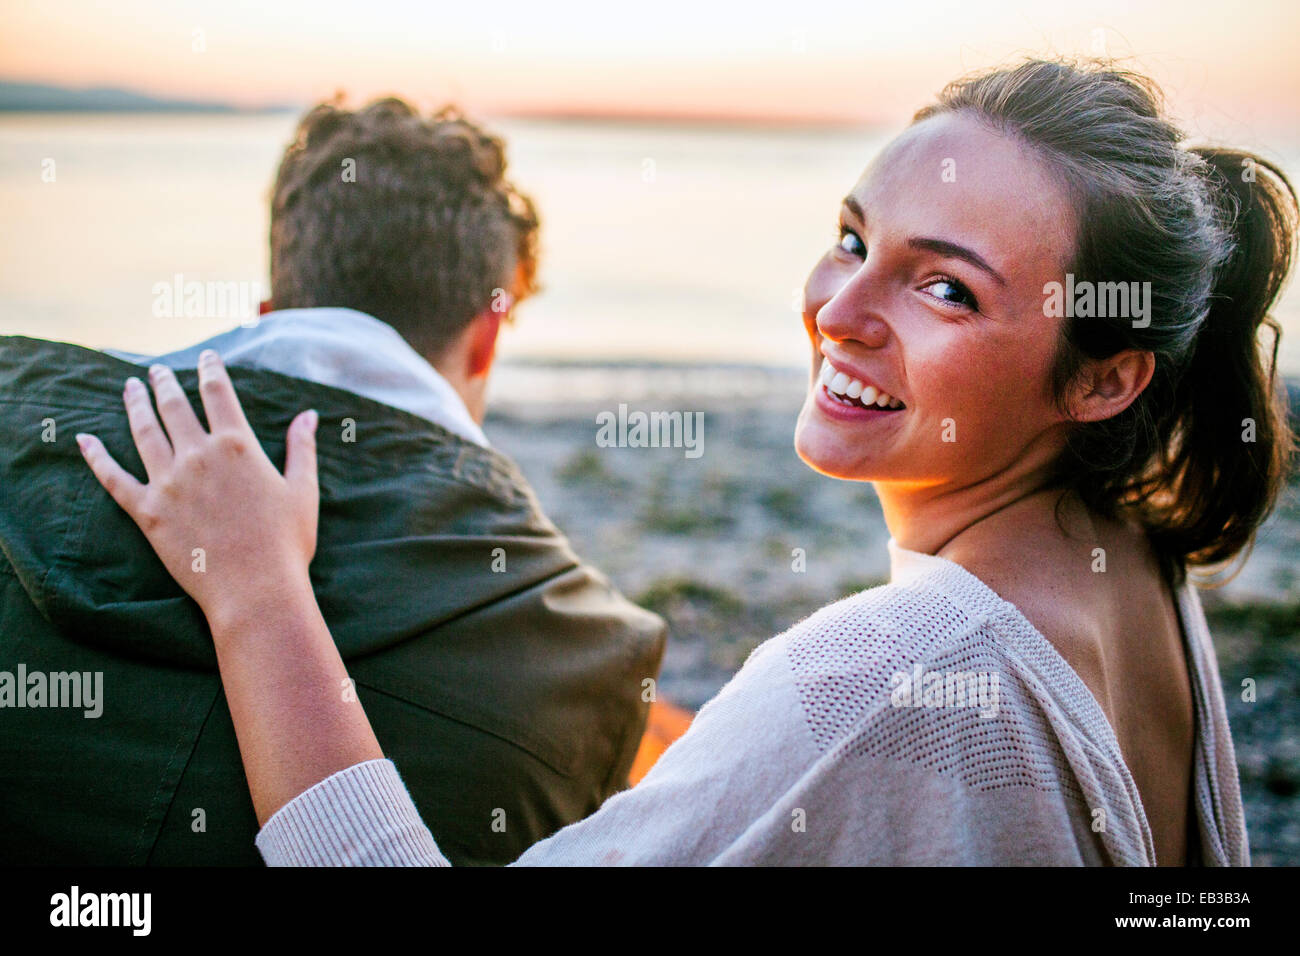 Caucasian woman relaxing with boyfriend on beach Stock Photo